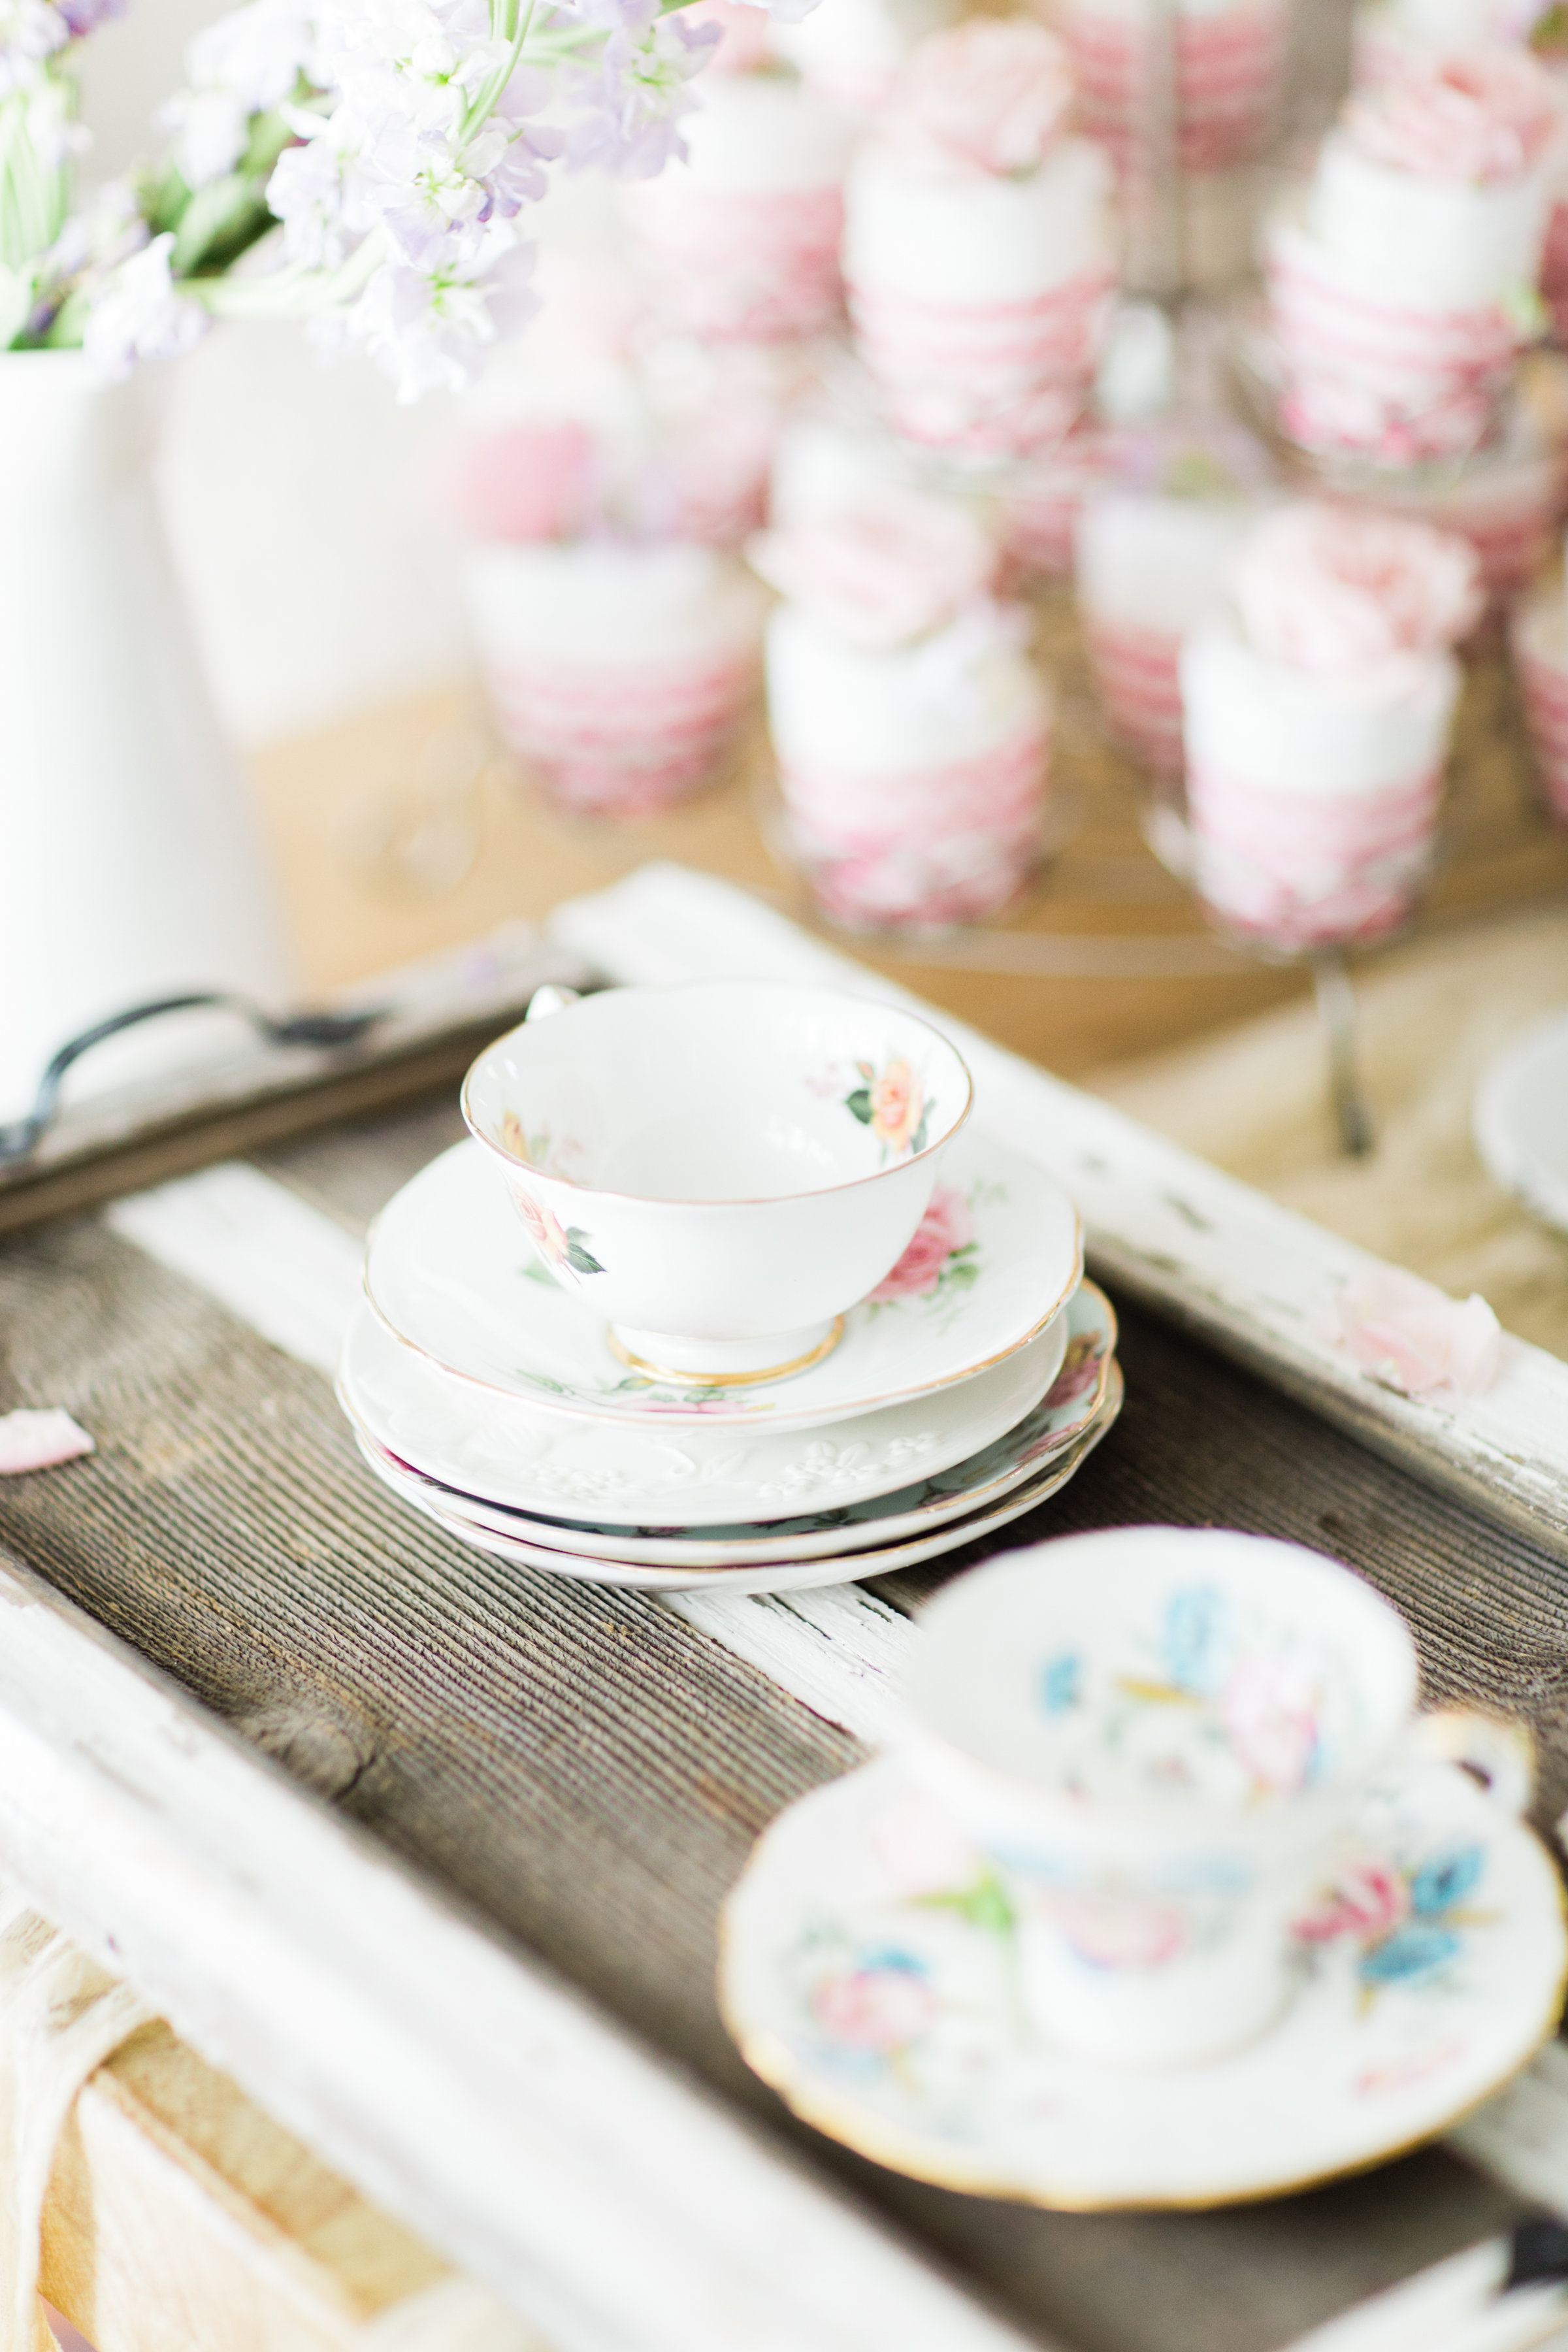 Lifestyle blogger Lexi of Glitter, Inc. shares how to throw a tea party baby shower in 6 easy steps; plus a DIY diaper cake using cupcake liners! #babyshower #teaparty #teapartybabyshower #shower #teapartyshower #party #newbaby #baby | Click through for the details. | glitterinc.com | @glitterinc